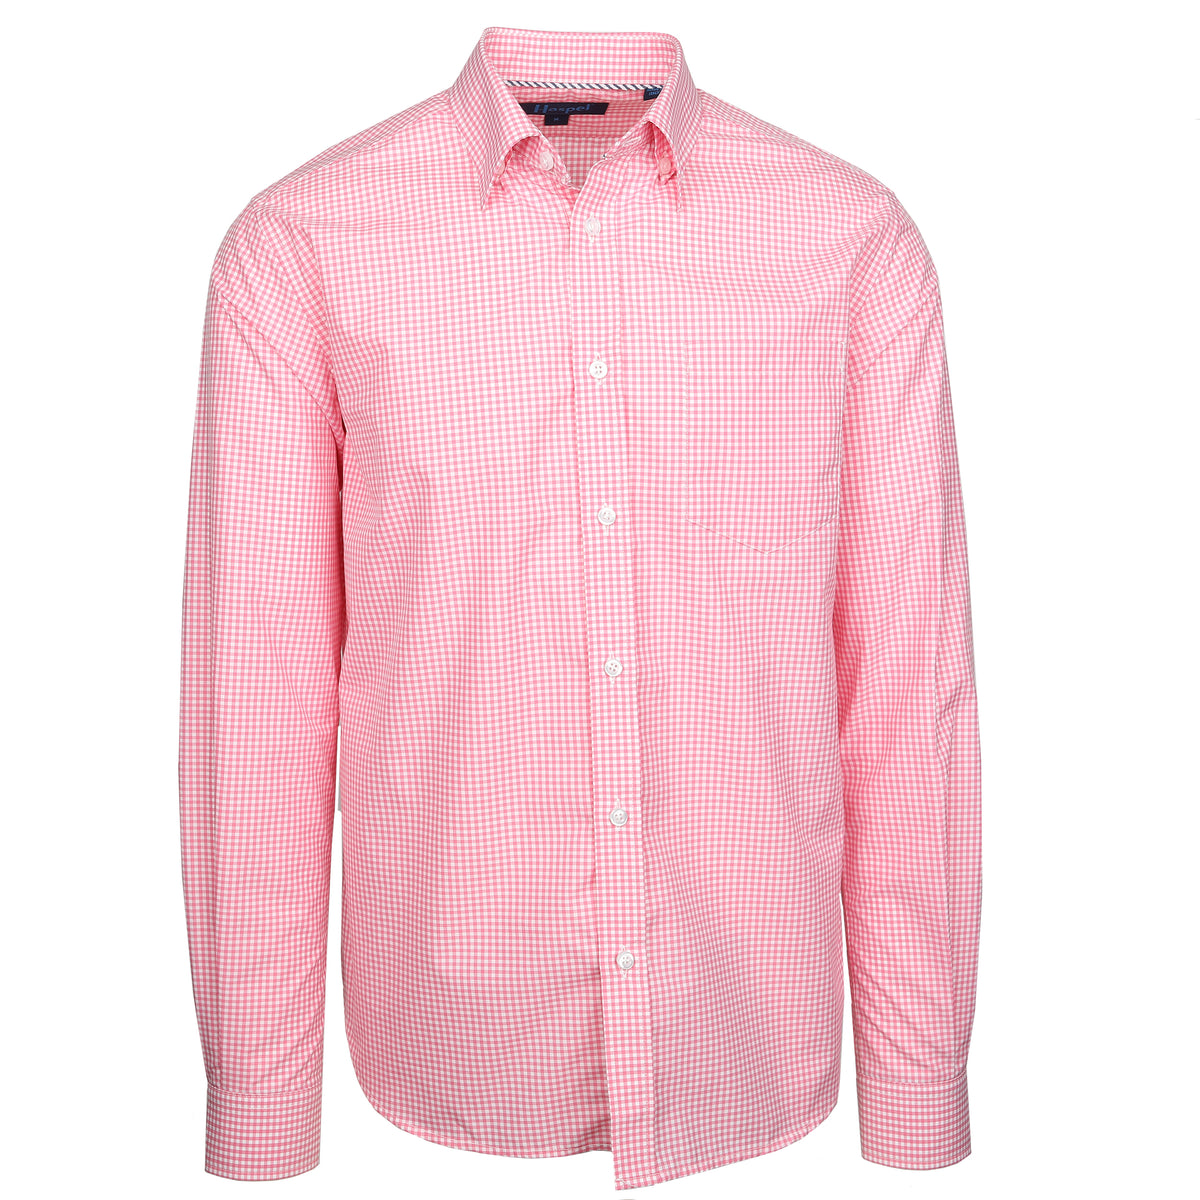 Pink gingham and the luxury of 100% Italian made cotton canvas is the look that checks all the boxes.  100% Cotton • Hidden Button Collar • Long Sleeve • Chest Pocket • Machine Washable • Made in Italy